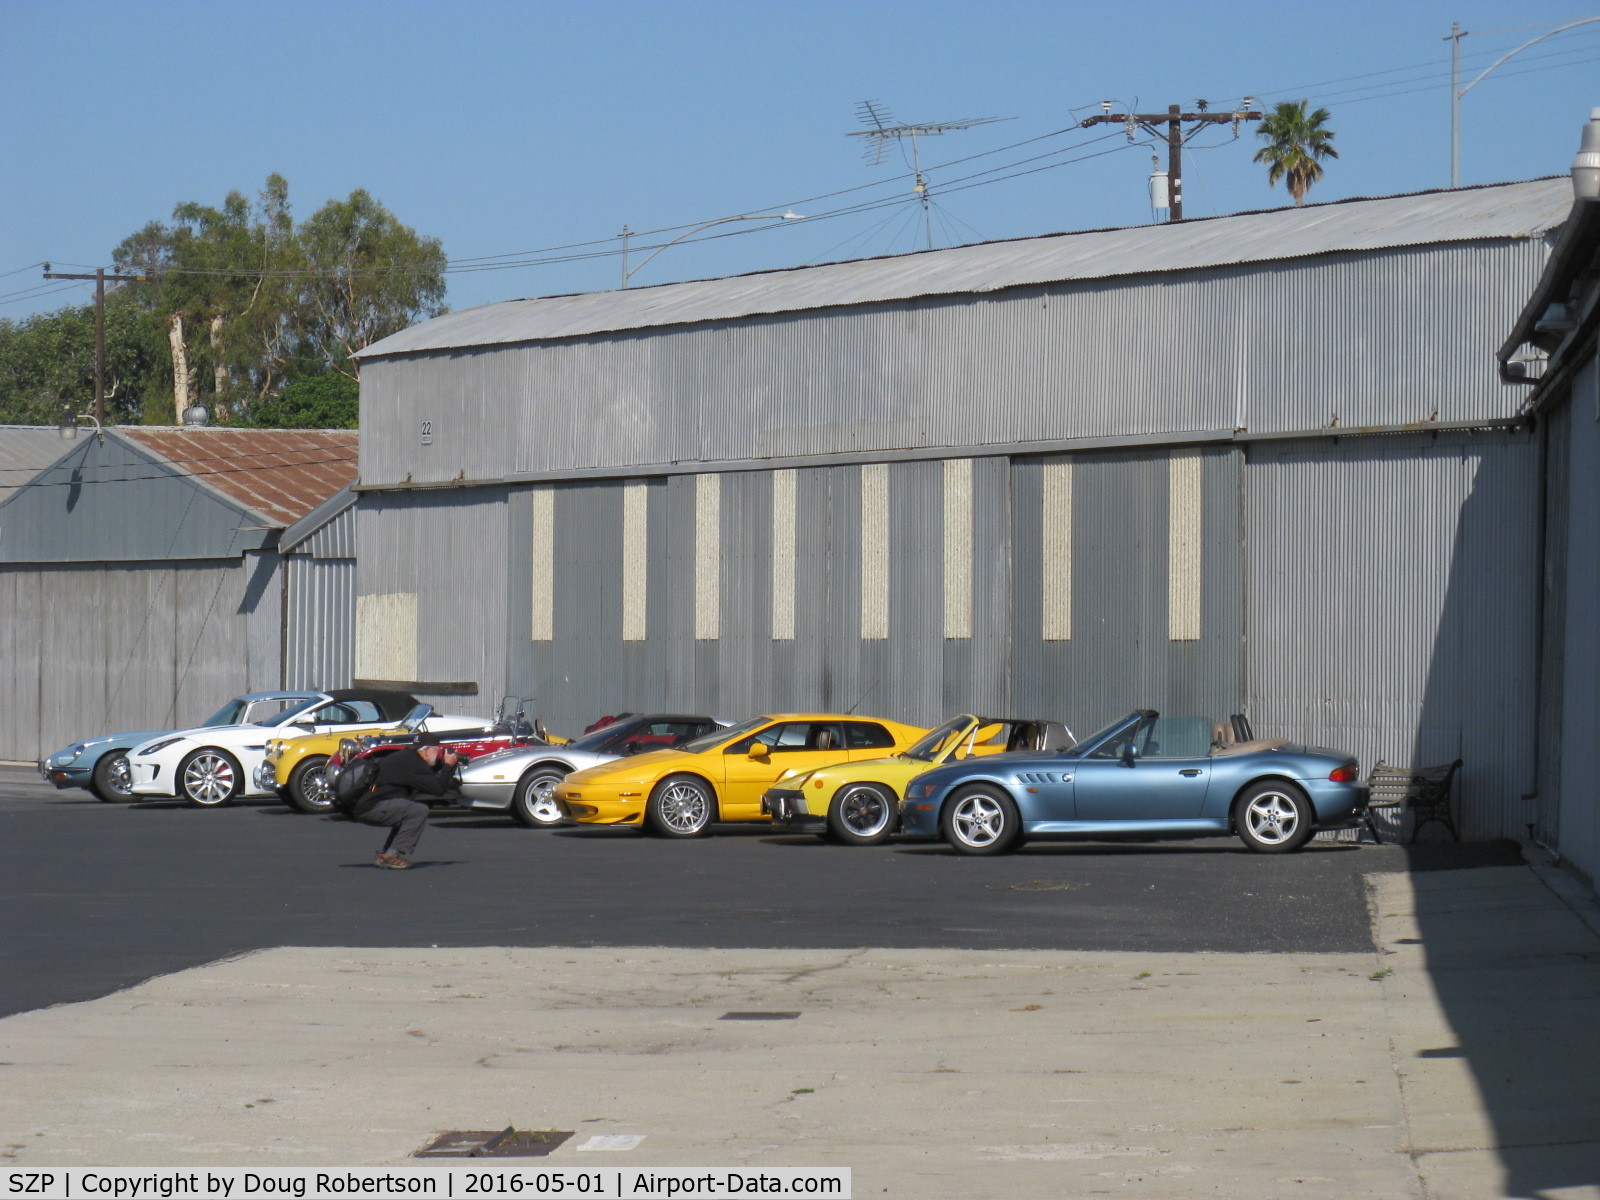 Santa Paula Airport (SZP) - Aviation Museum of Santa Paula First Sunday Open House also invites car clubs display-photographing the cars' photographer